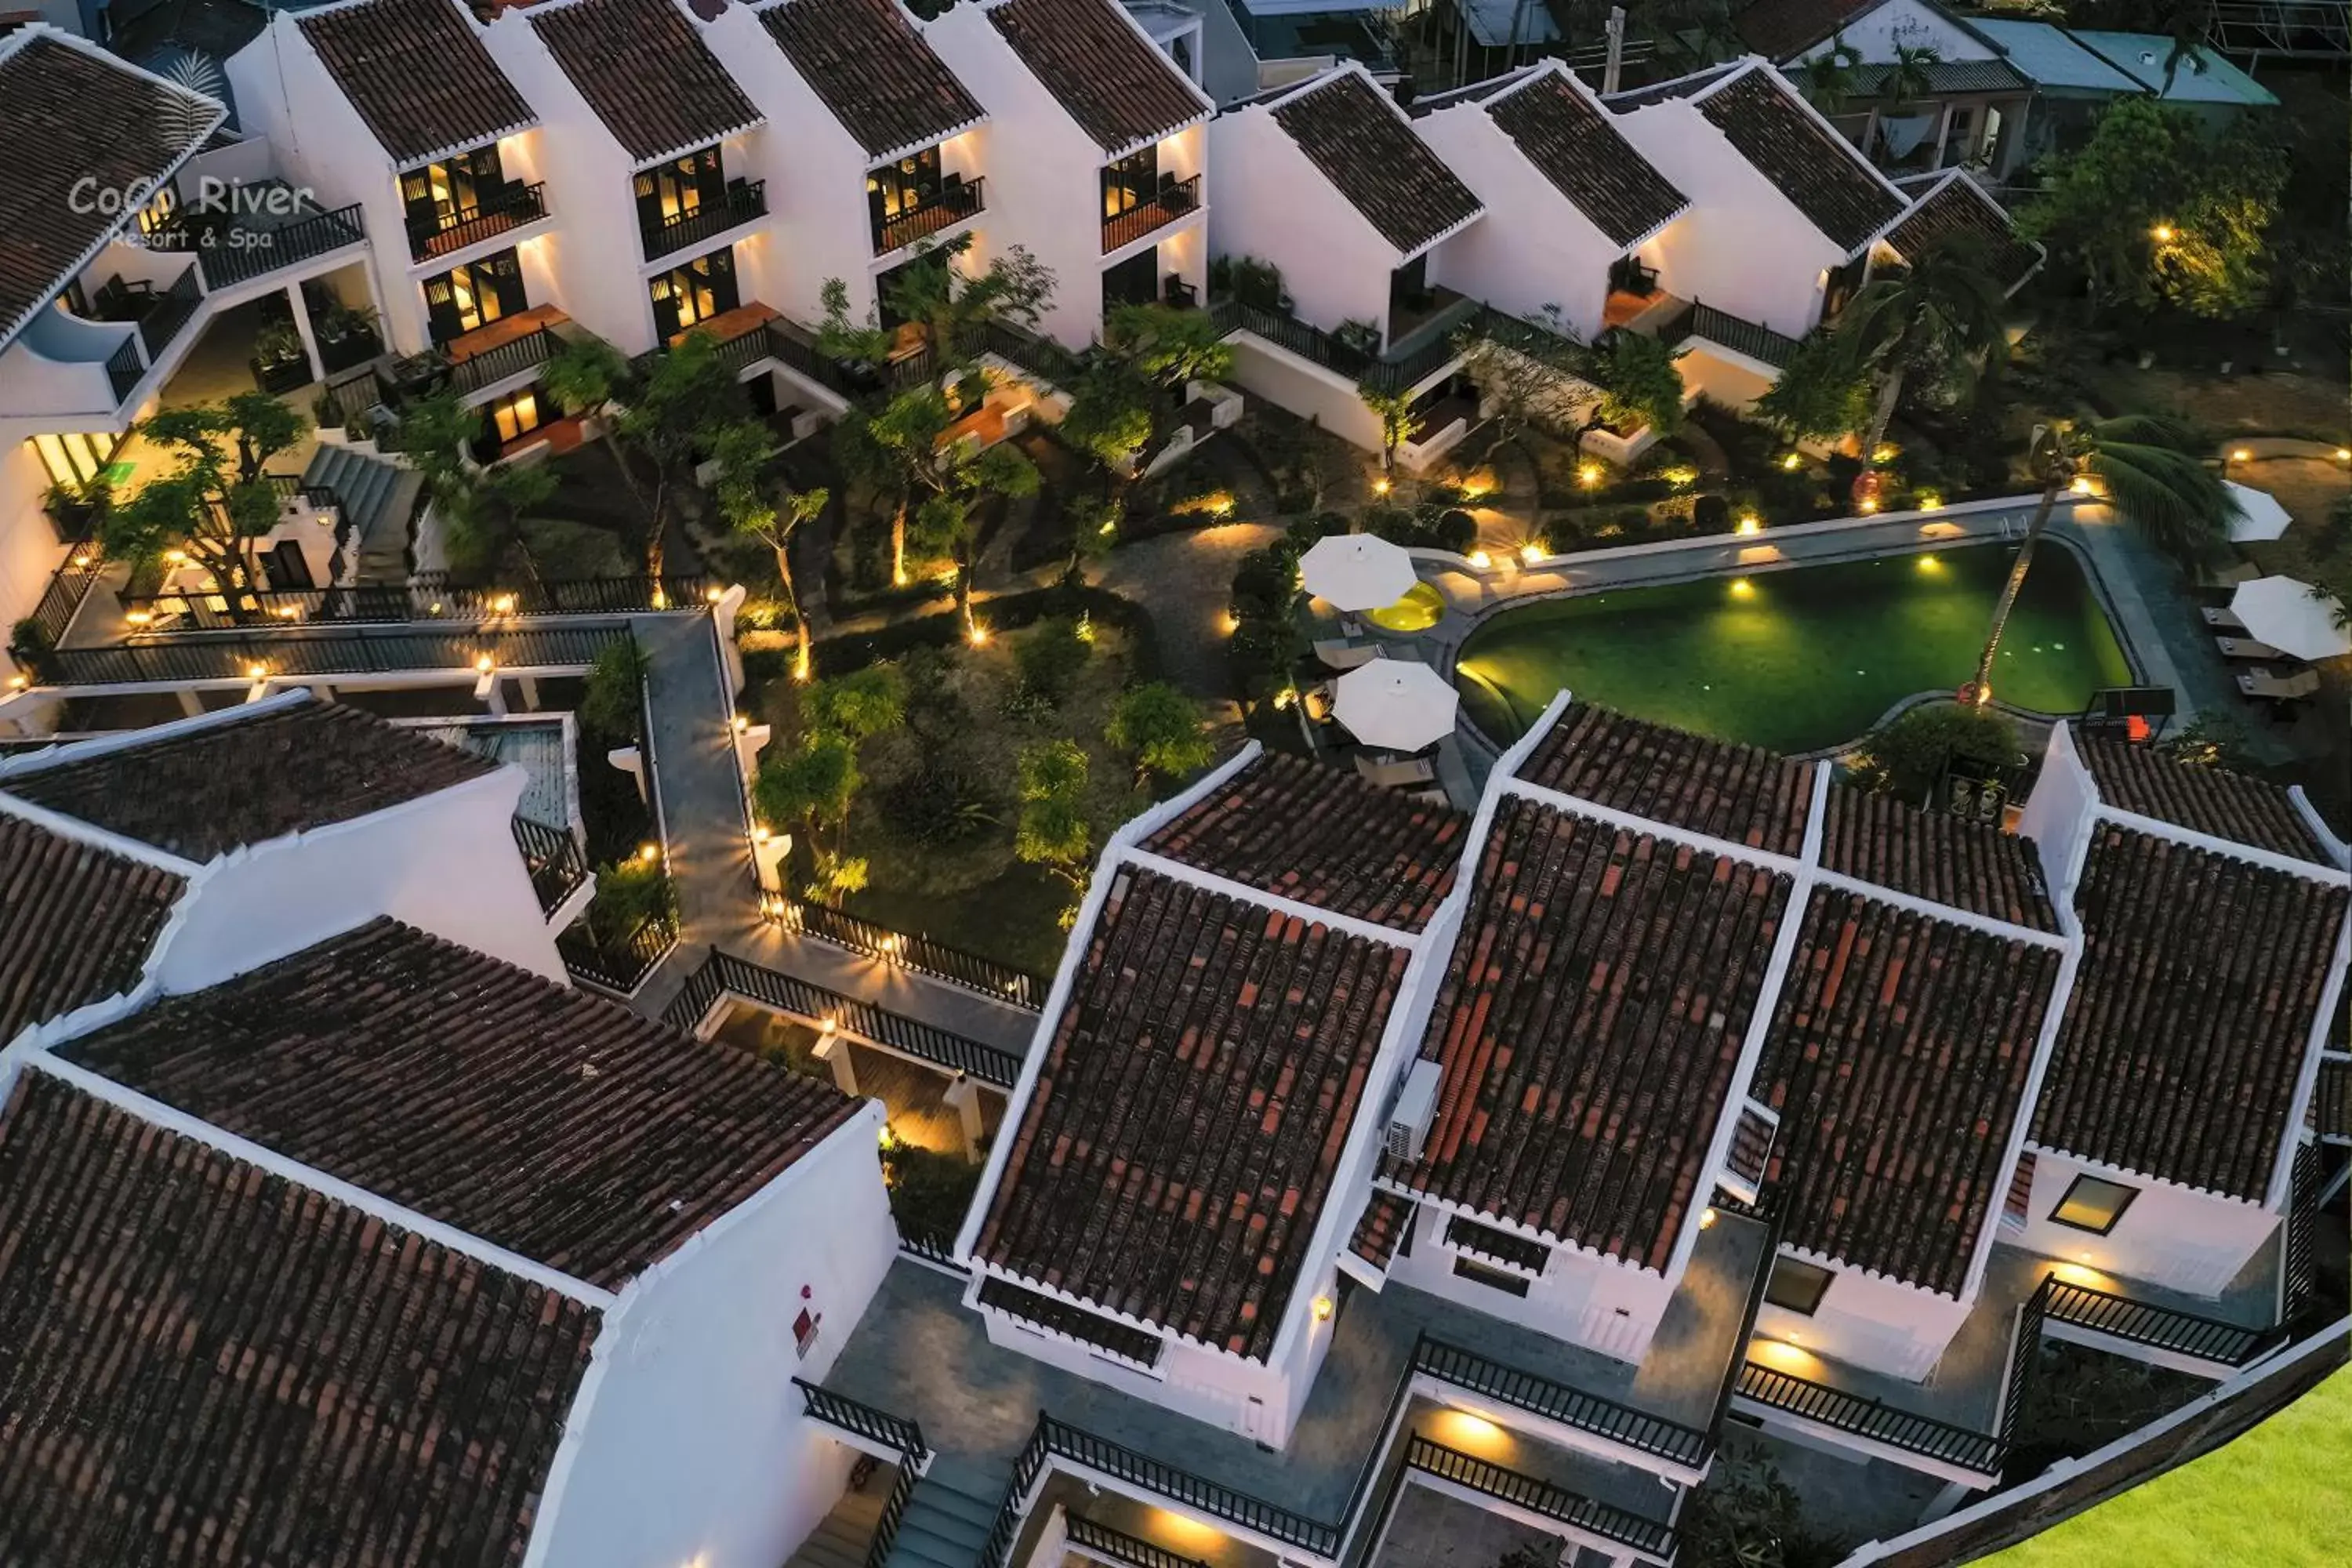 Property building, Bird's-eye View in Hoi An Coco River Resort & Spa